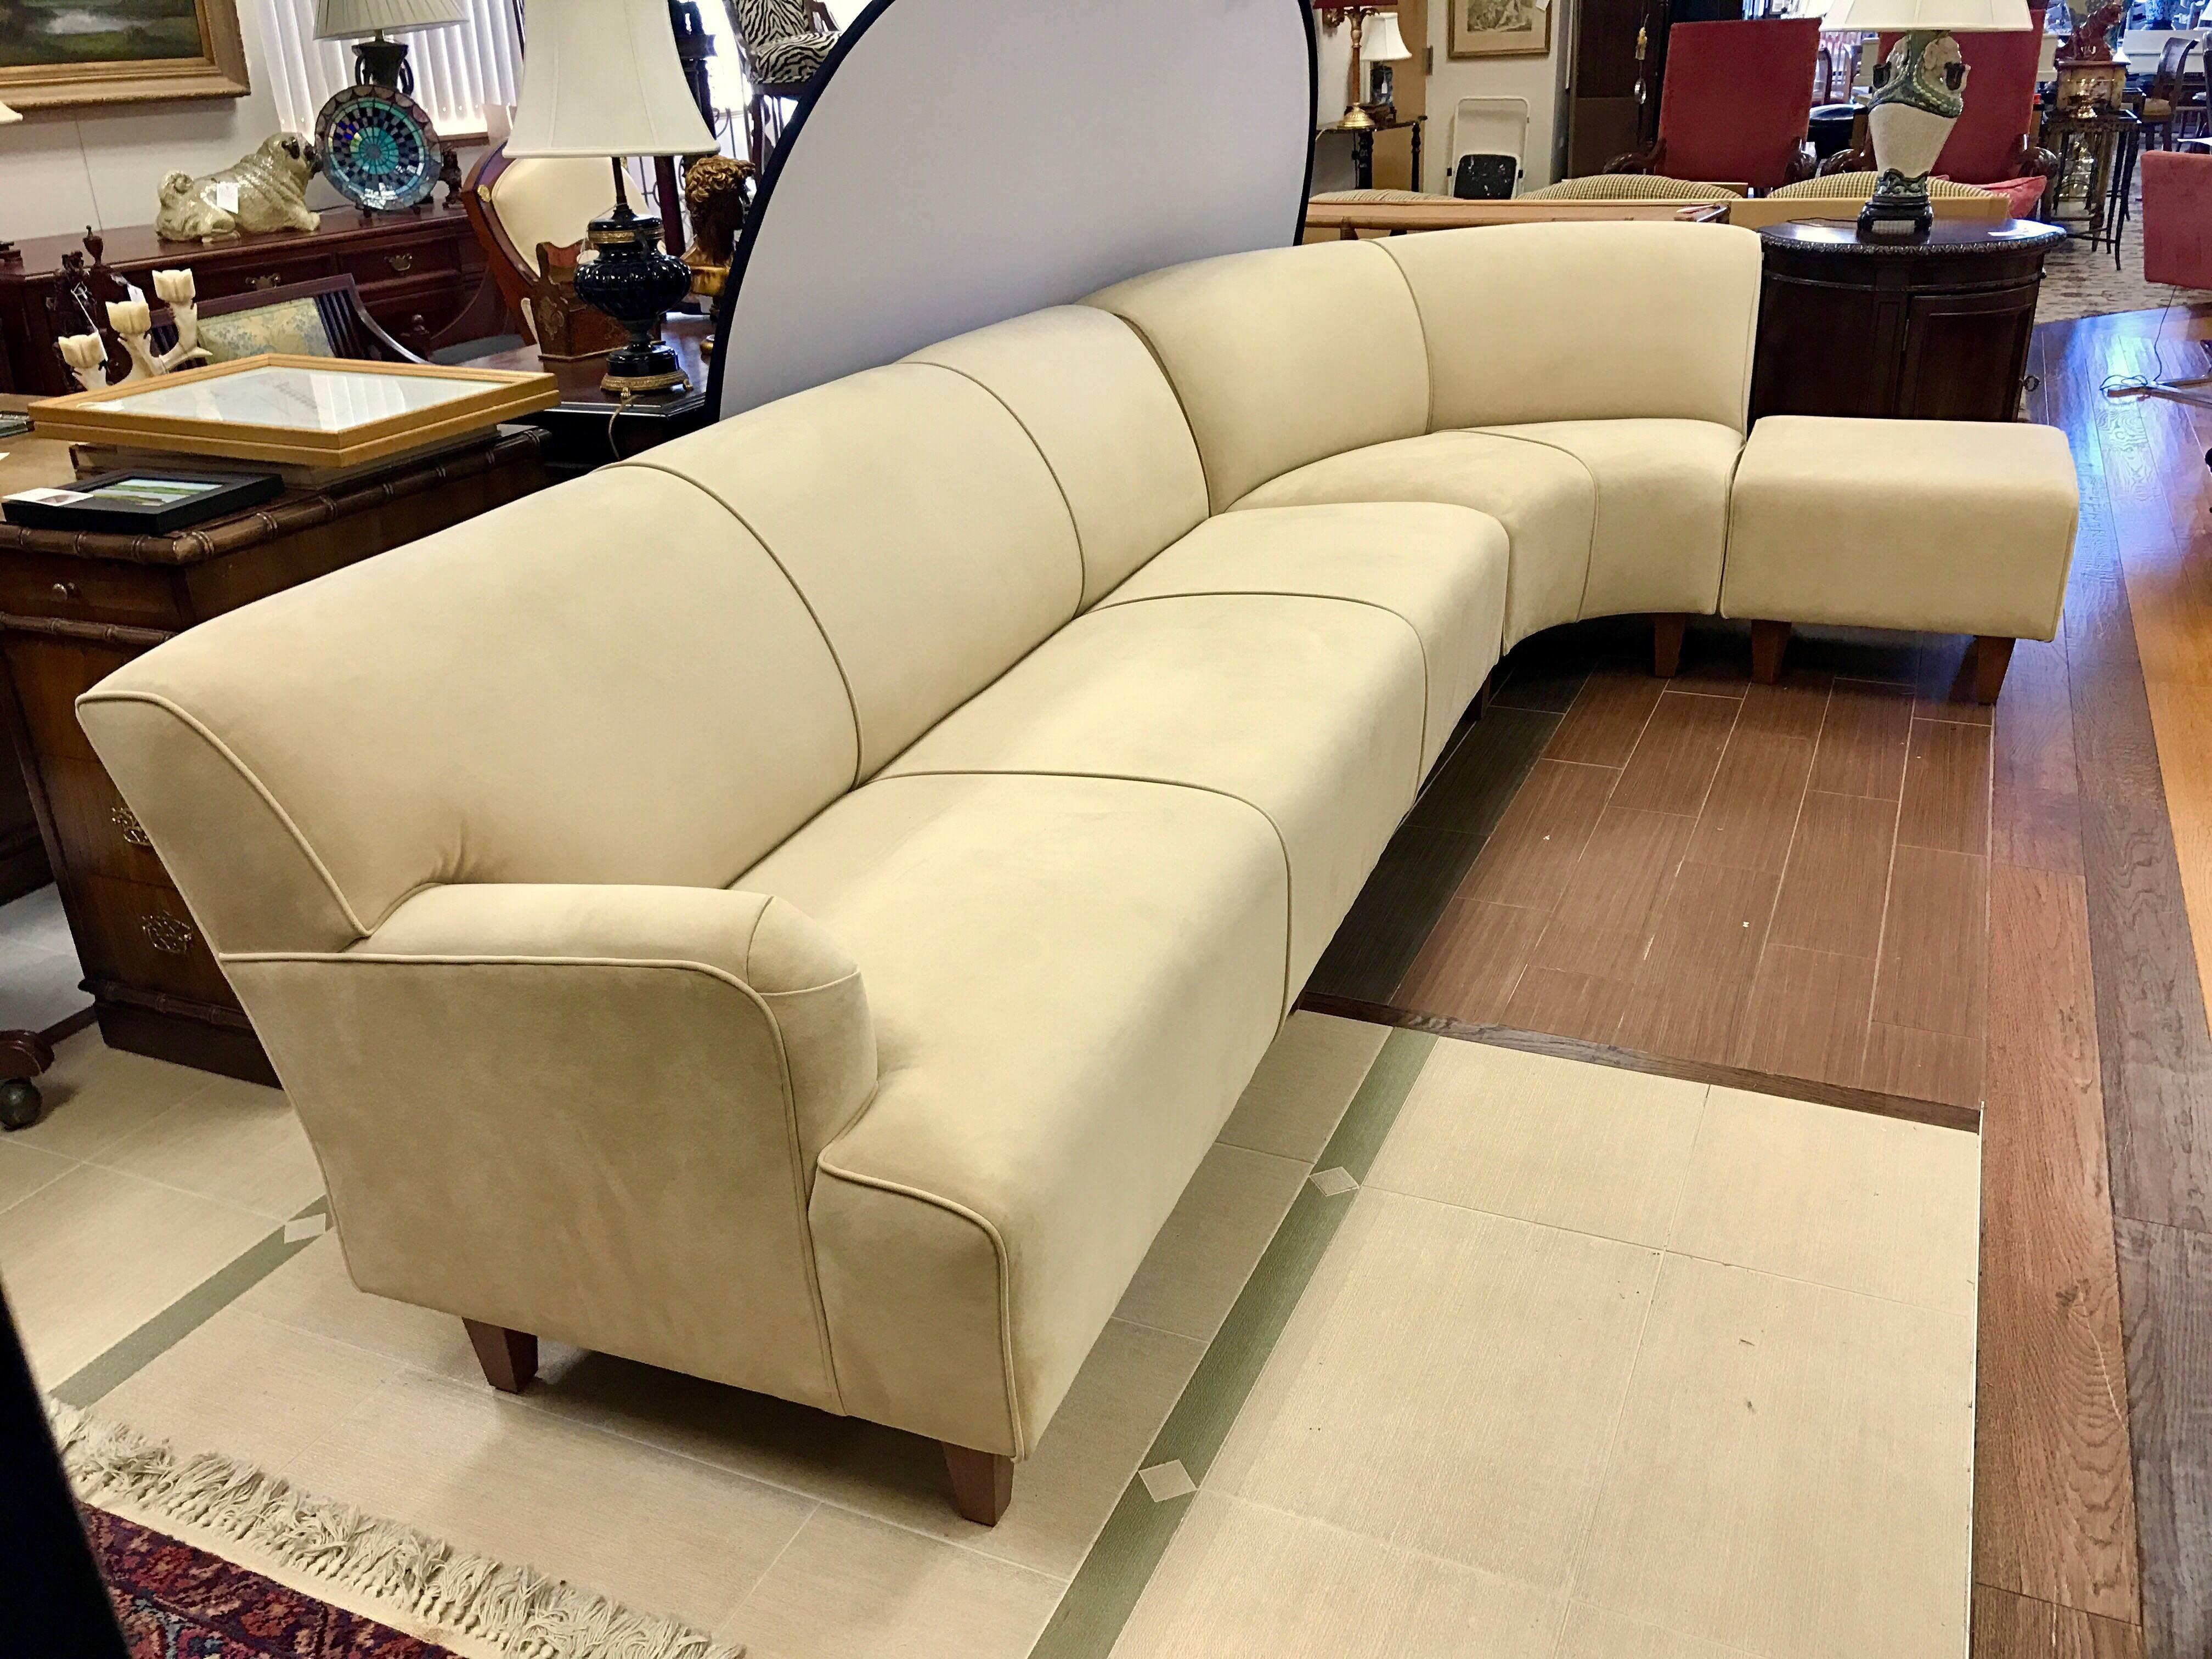 Newly upholstered in beige suede leather, this three-piece curved sectional sofa, in the style of Vladimir Kagan, is a must have. Total dimensions are below. The individual dimensions are as follows:
1. Long left facing piece - 82 inches wide x 31